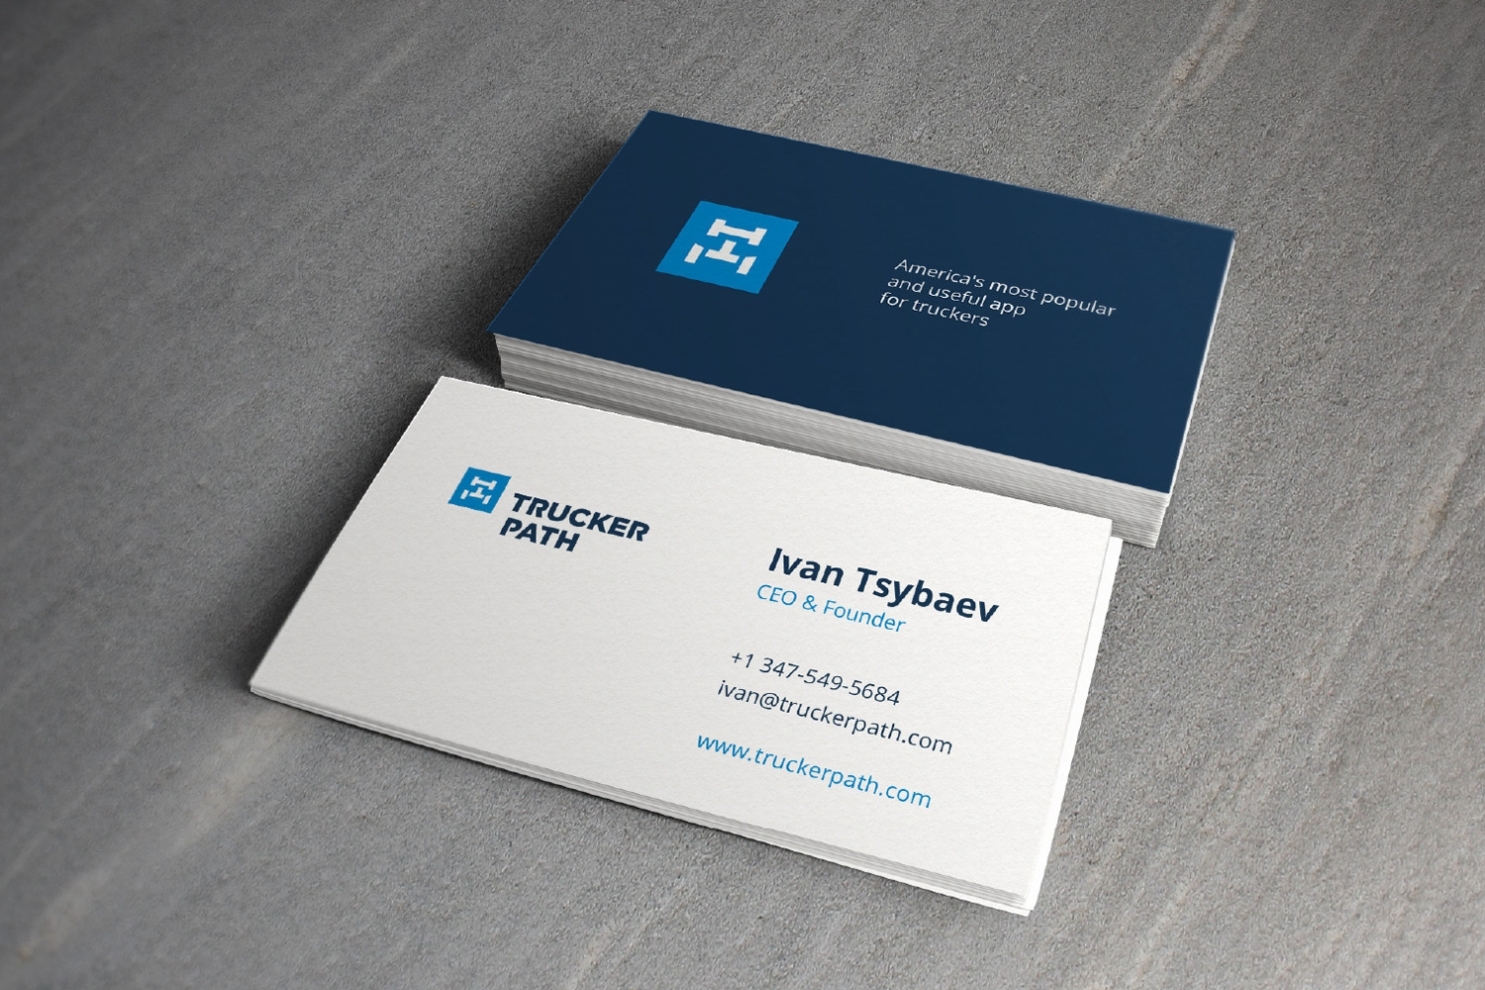 Business Cards For Truckers - Business Card Tips Within Transport Business Cards Templates Free